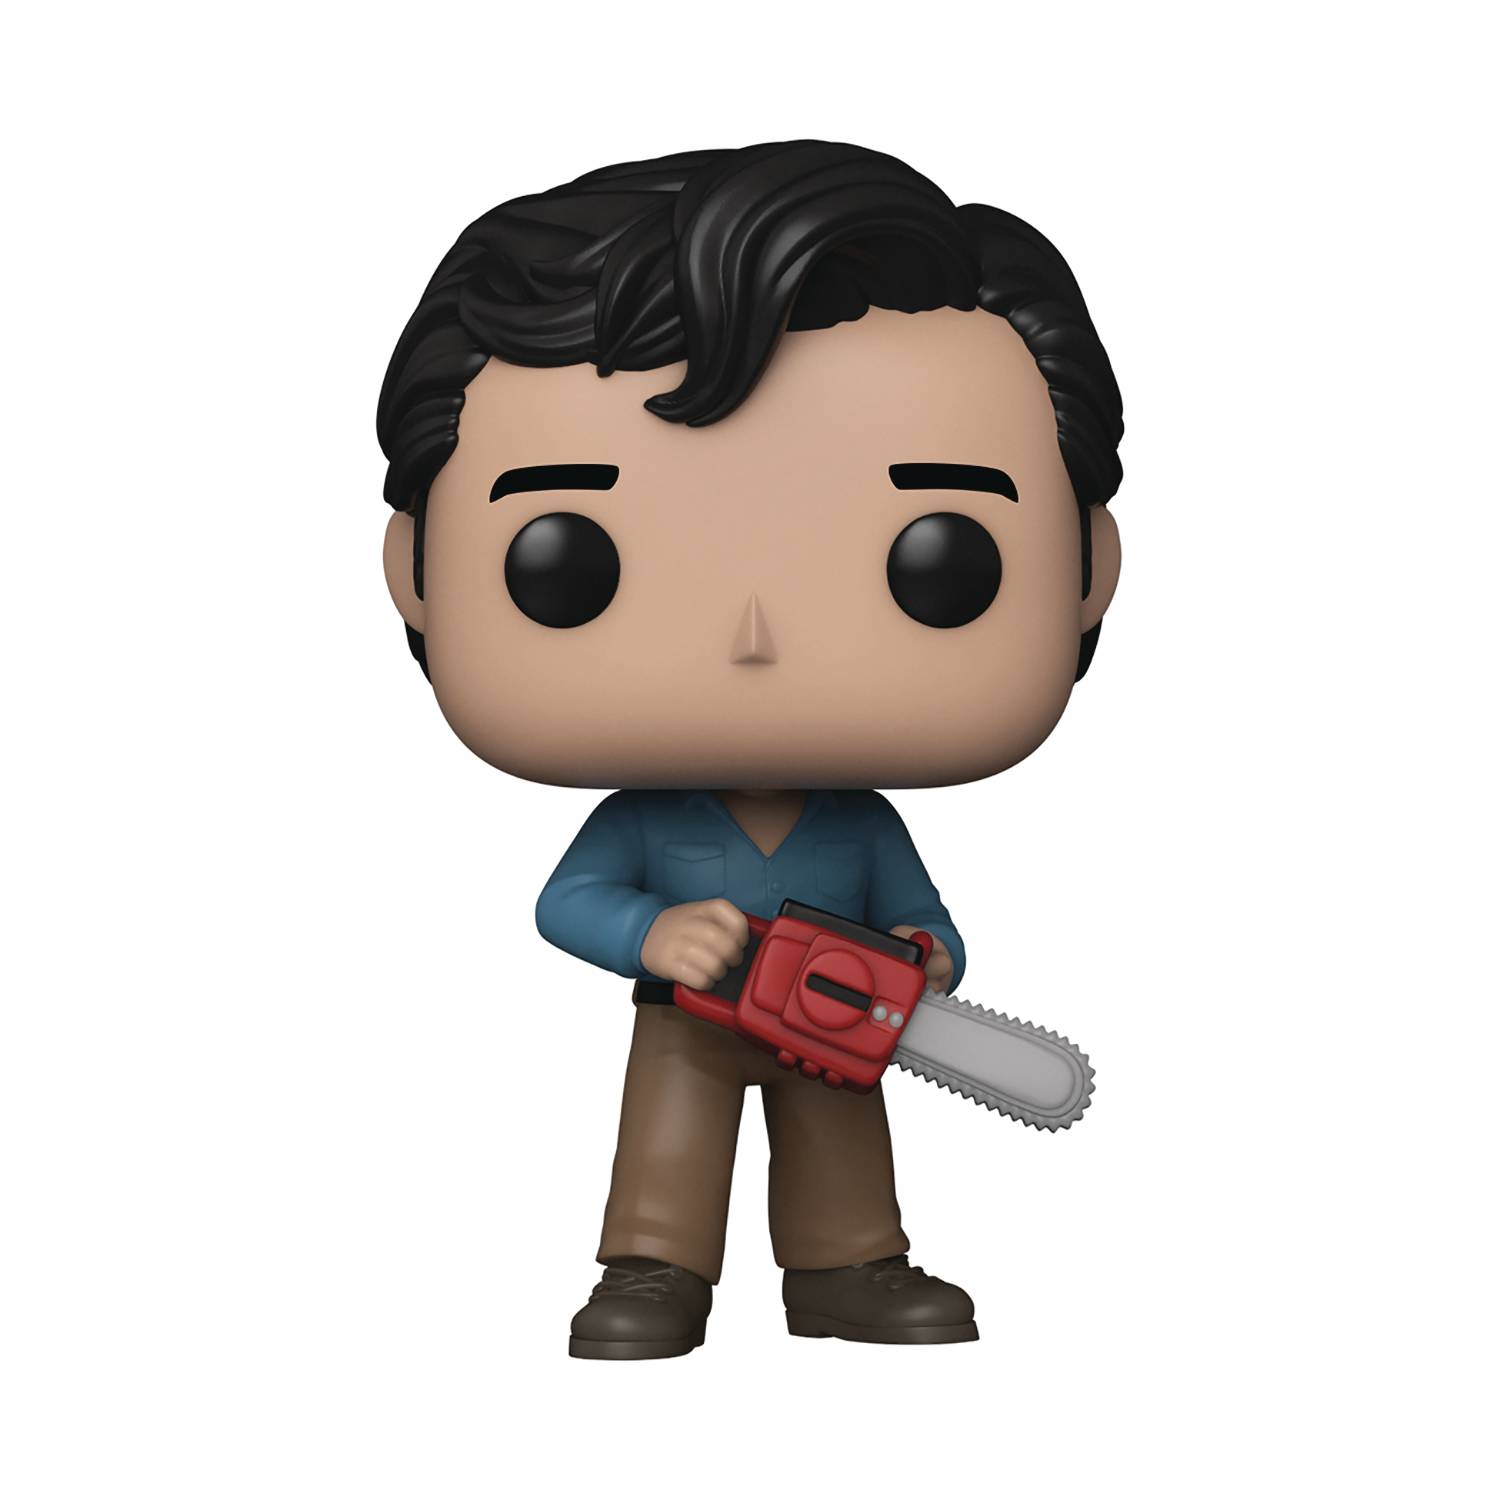 POP MOVIES EVIL DEAD ANNIVERSARY ASH W/ BD CHASE VIN FIG